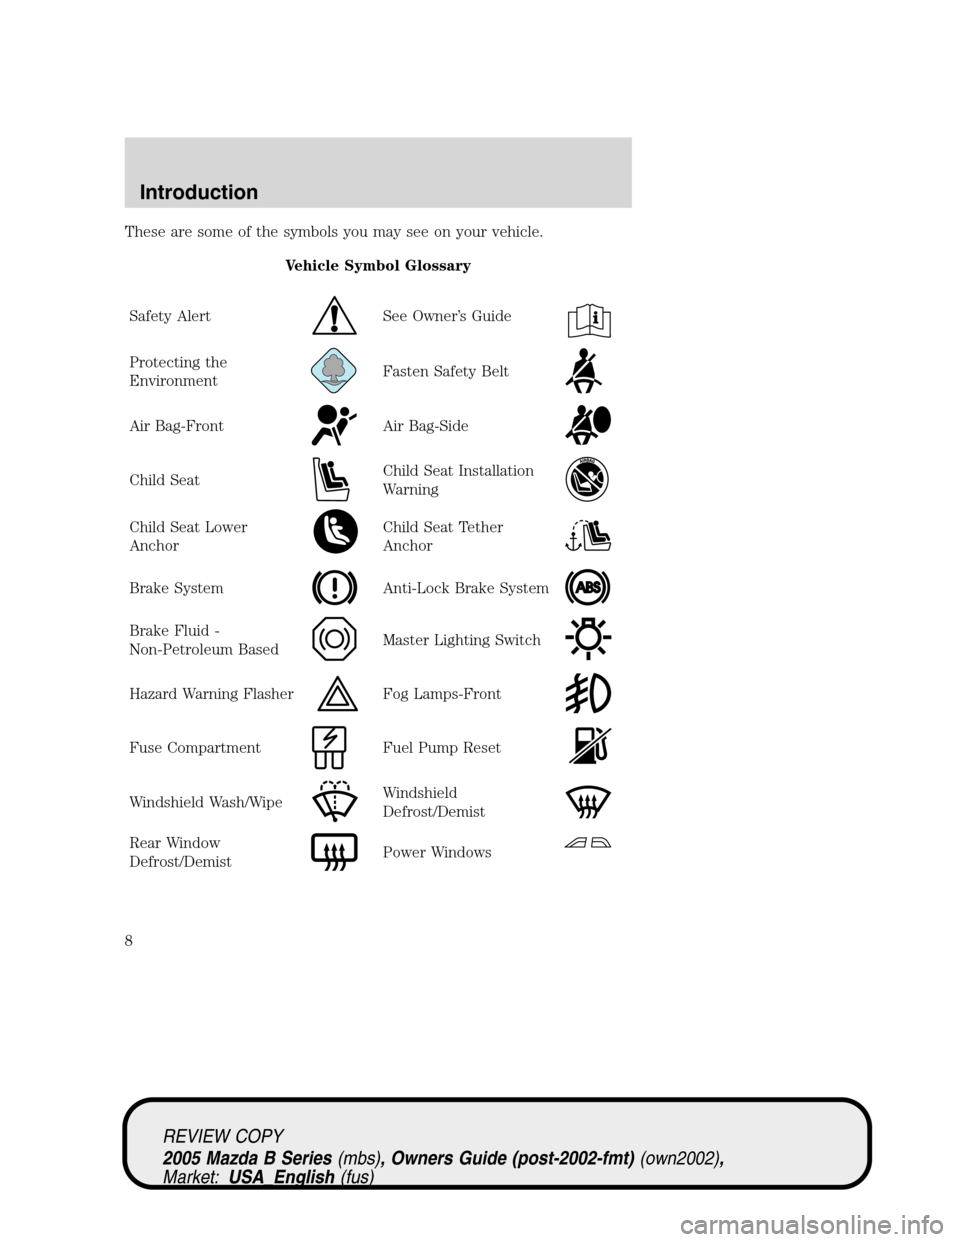 MAZDA MODEL B2300 TRUCK 2005  Owners Manual (in English) These are some of the symbols you may see on your vehicle.
Vehicle Symbol Glossary
Safety Alert
See Owner’s Guide
Protecting the
EnvironmentFasten Safety Belt
Air Bag-FrontAir Bag-Side
Child SeatChi